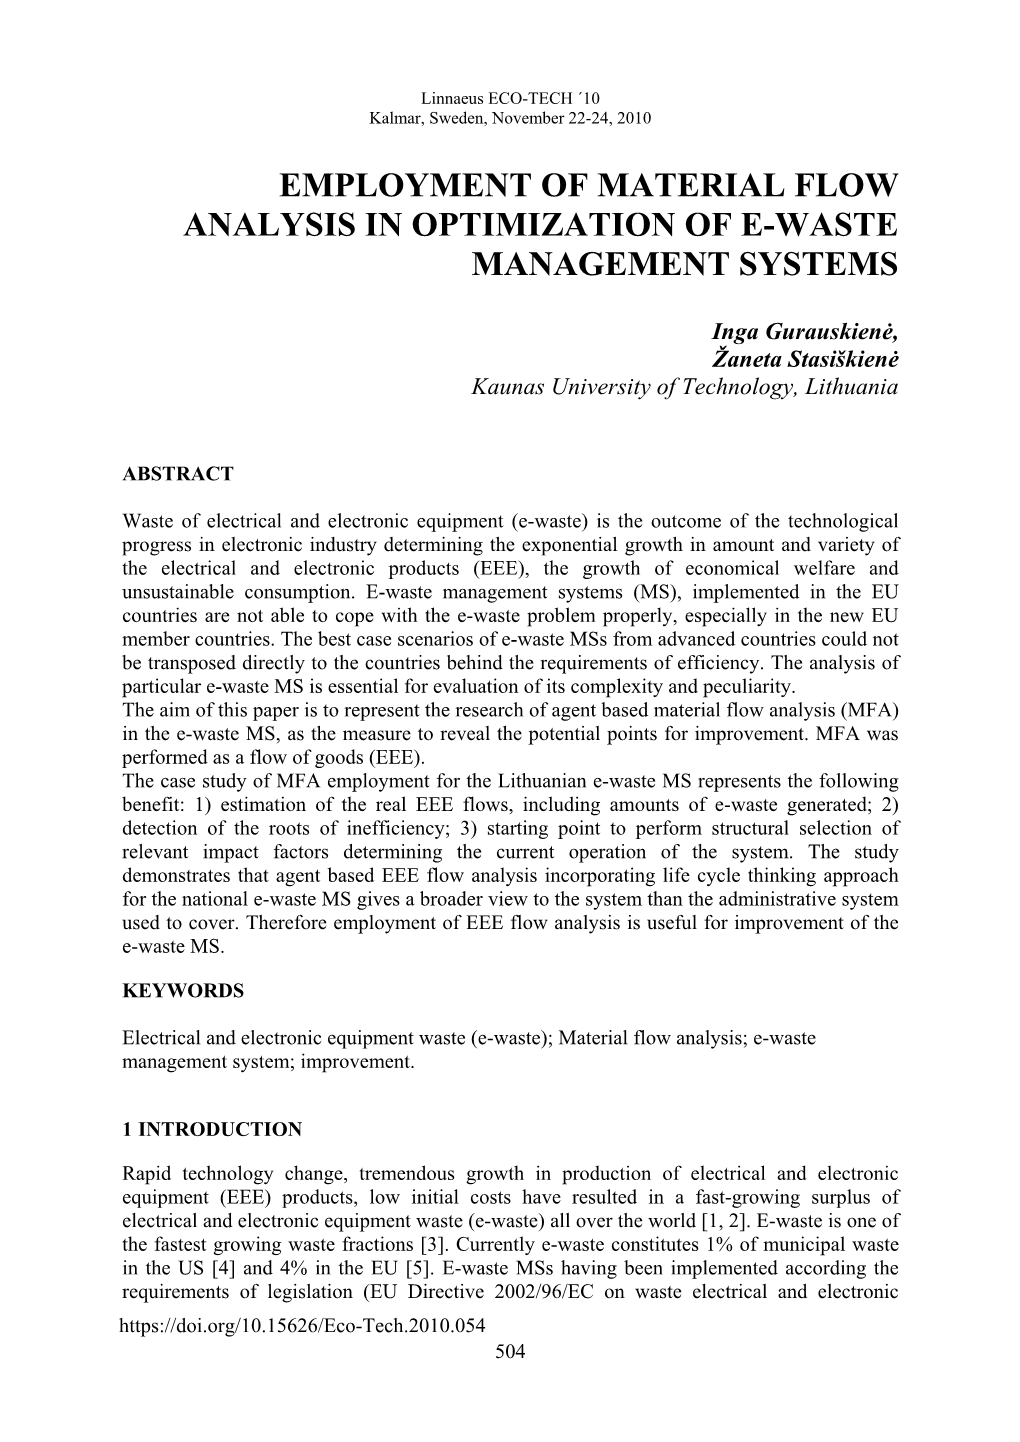 Employment of Material Flow Analysis in Optimization of E-Waste Management Systems